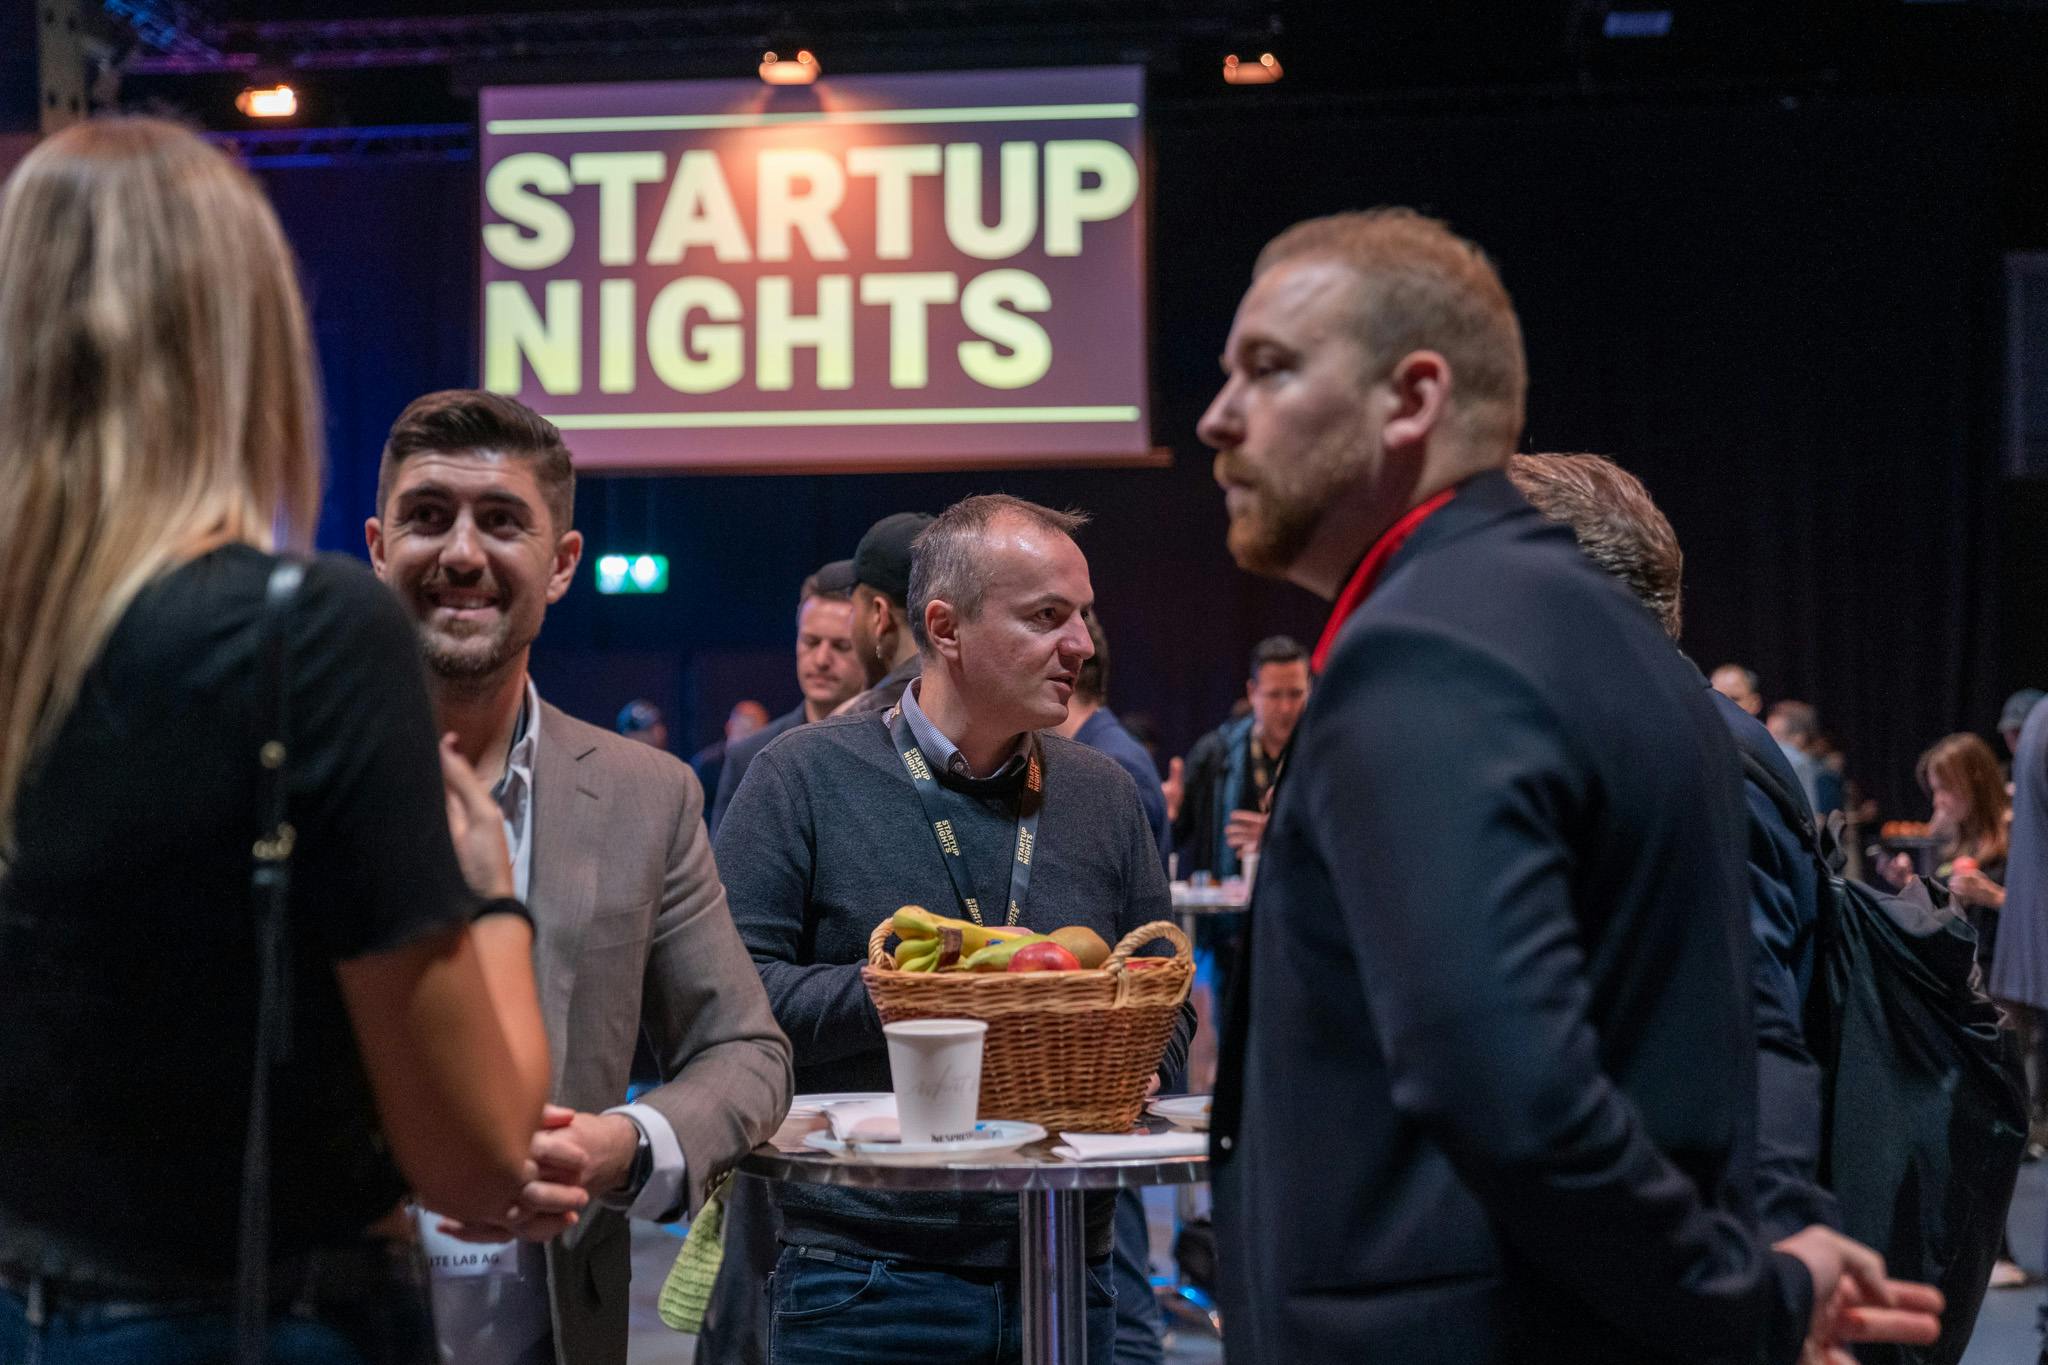 Attendees speaking together at Startup Nights